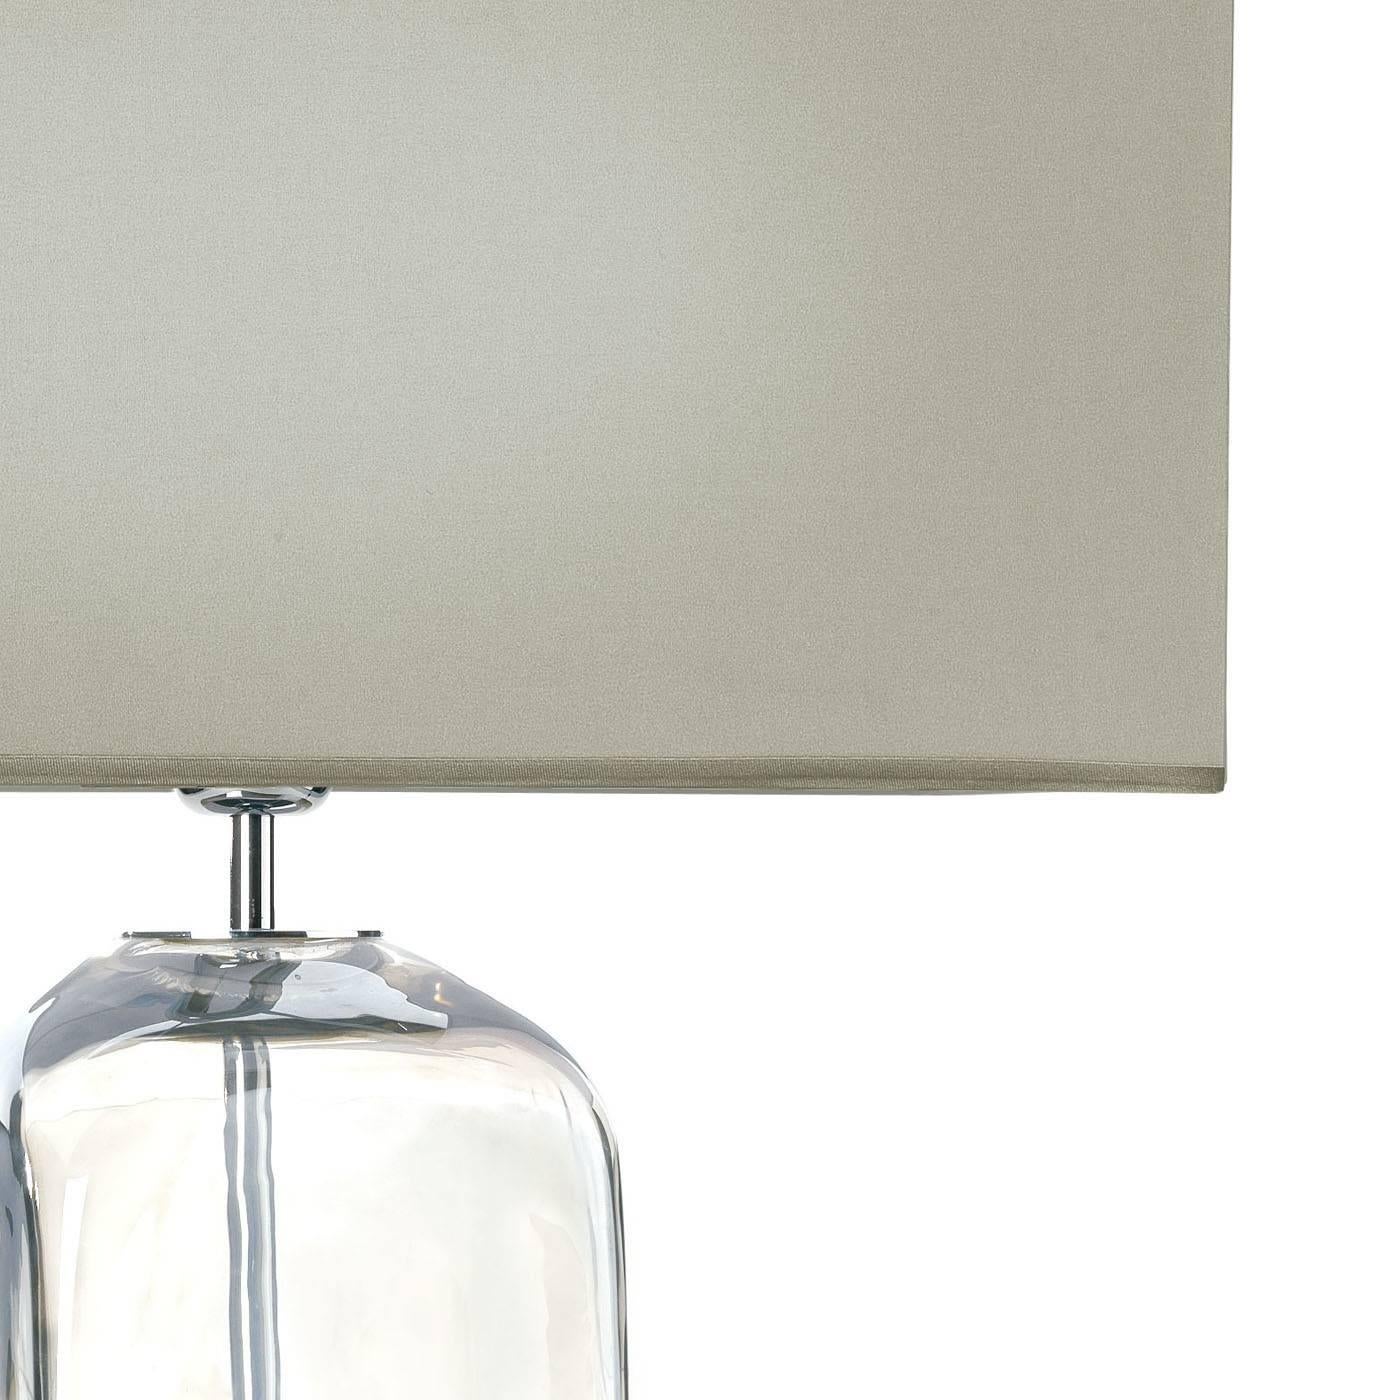 The chromed metal of the shaft of this lamp is visible through the transparency created by the glass container that envelops it. This striking base makes the fabric-covered rectangular shade above seemingly float in space and gives lightness to this